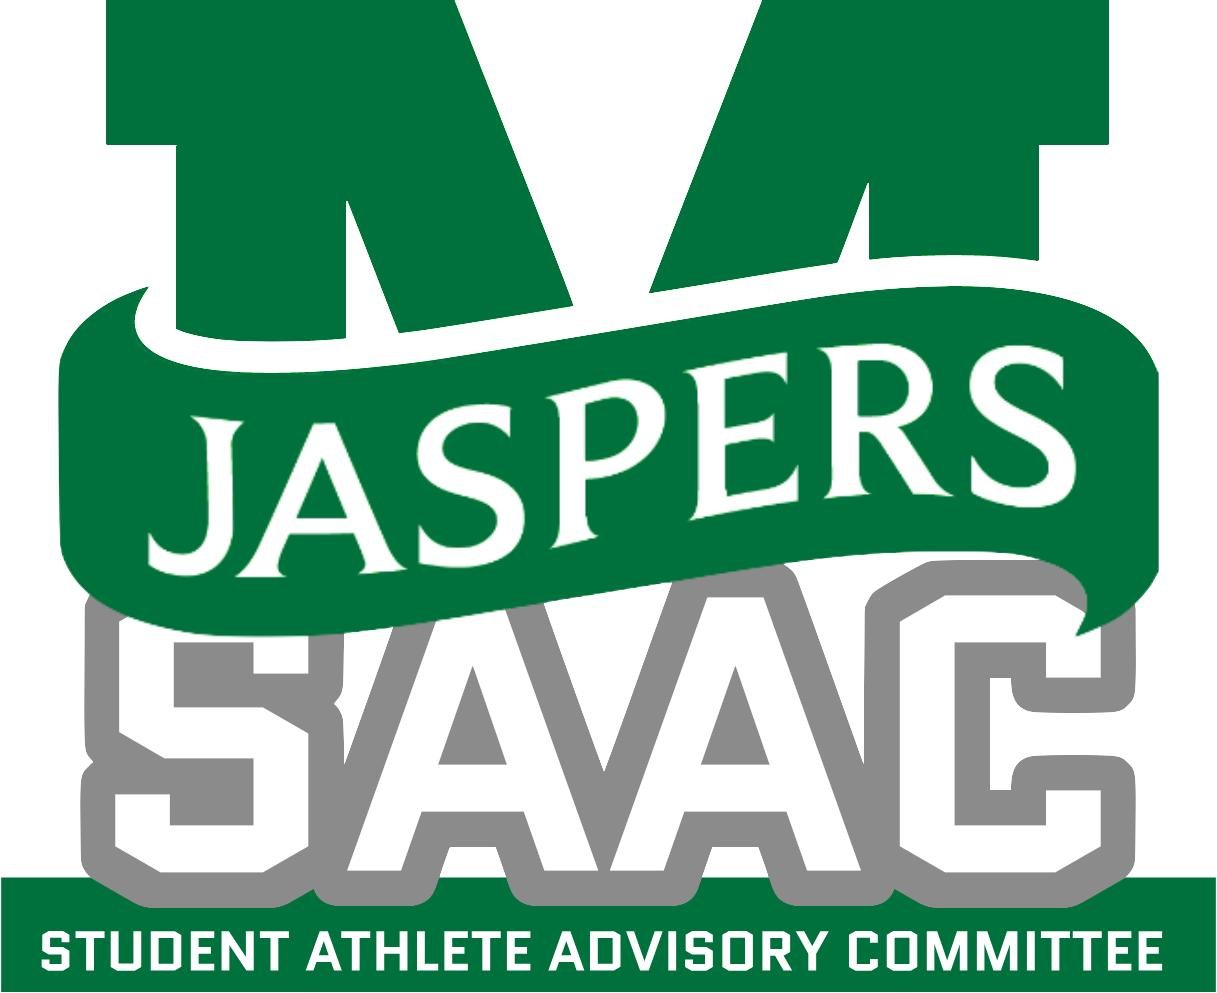 The Manhattan College Student Athlete Advisory Committee (SAAC), is a group of student athletes who focus on improving school spirit & bettering the community.